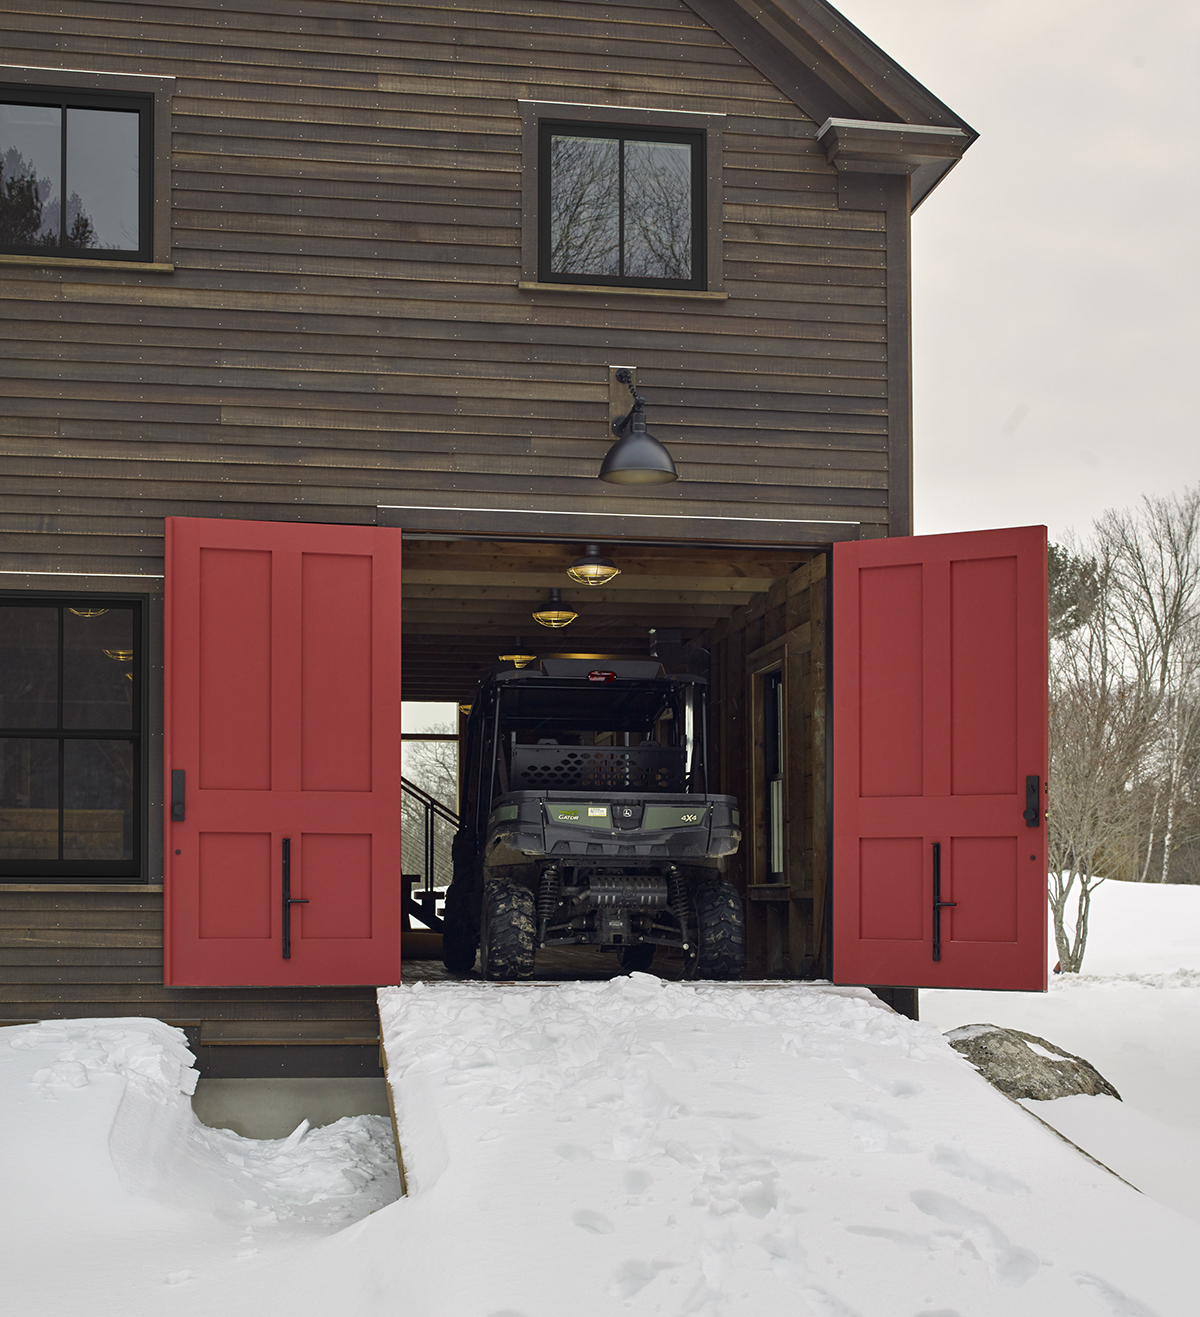 The cozy barn-style home has large doors for storing toys and staying out of the snow.